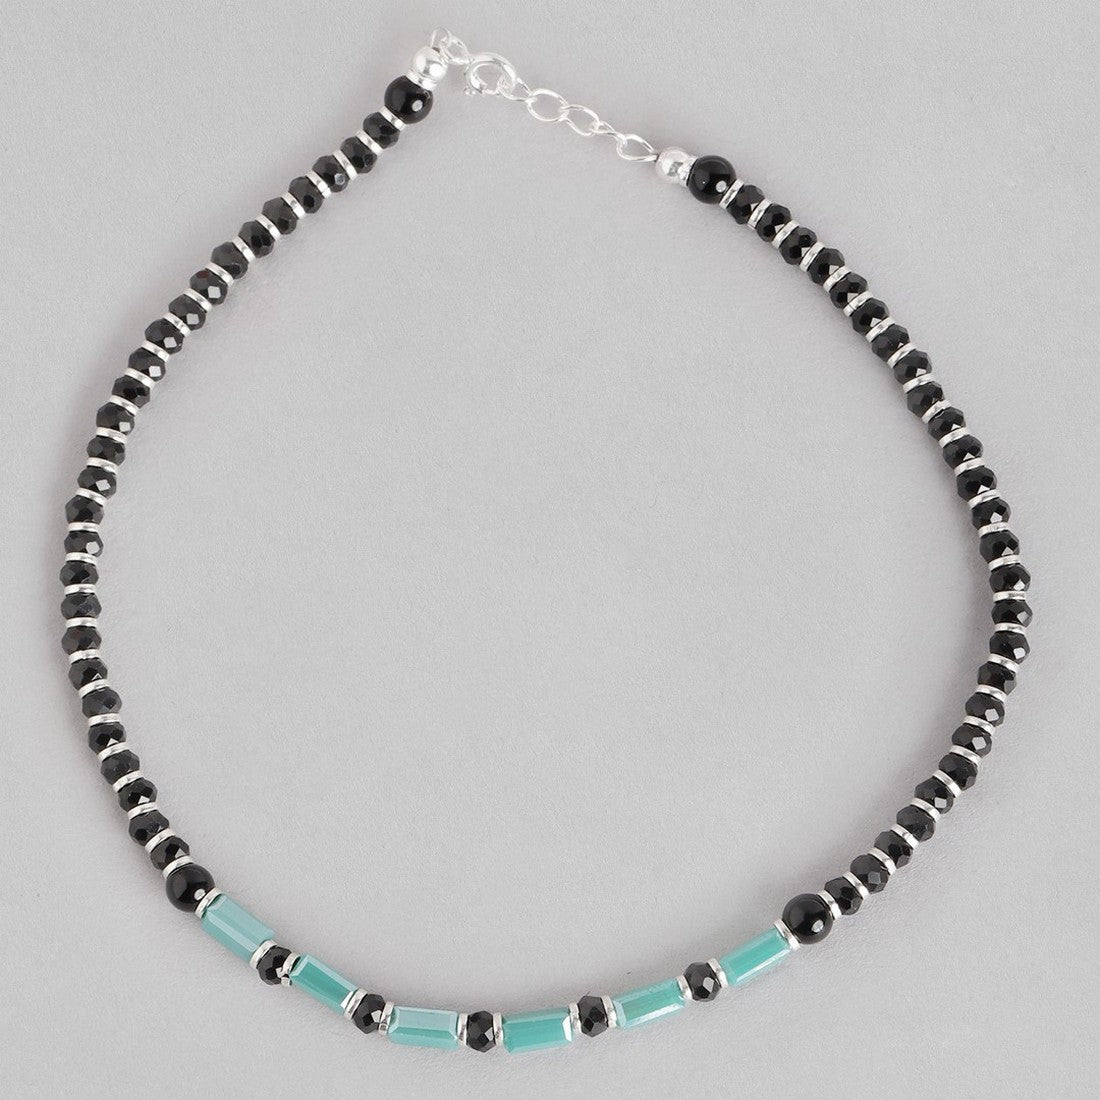 Green Stone & Beads 925 Sterling Silver Anklet